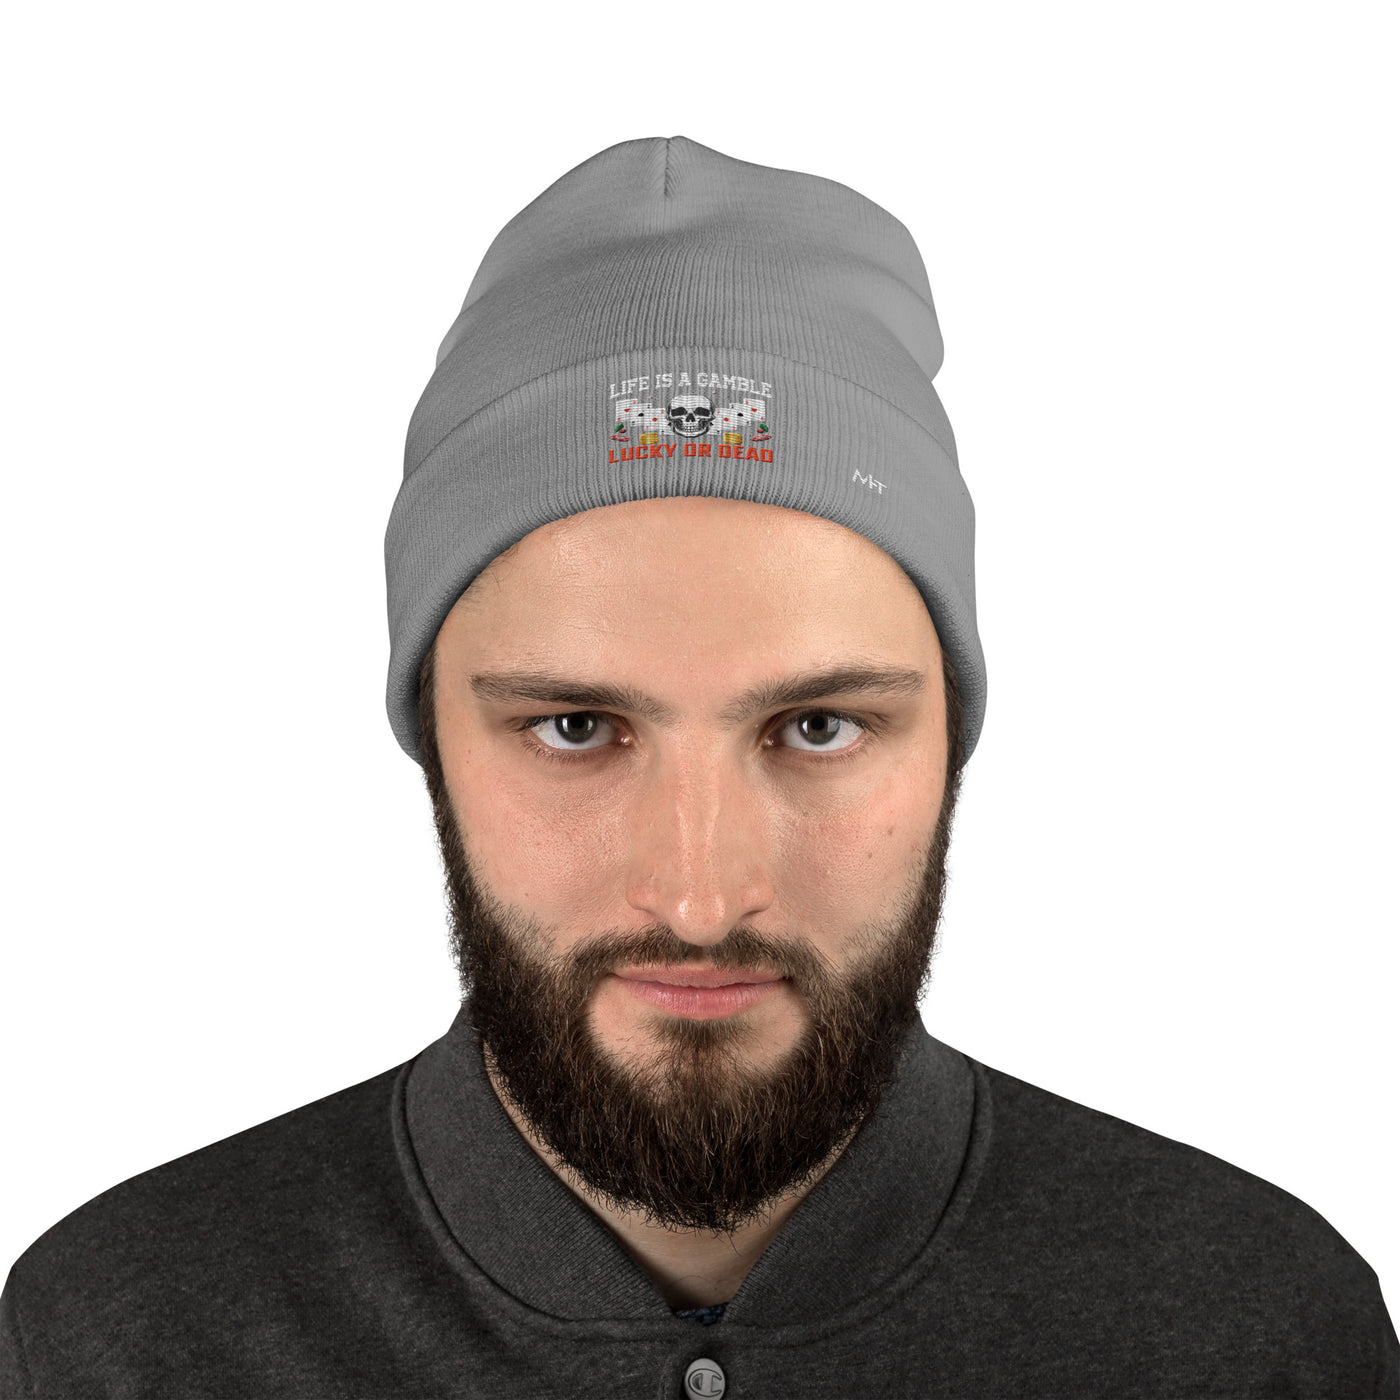 Life is a Gamble; Lucky or Dead - Embroidered Beanie